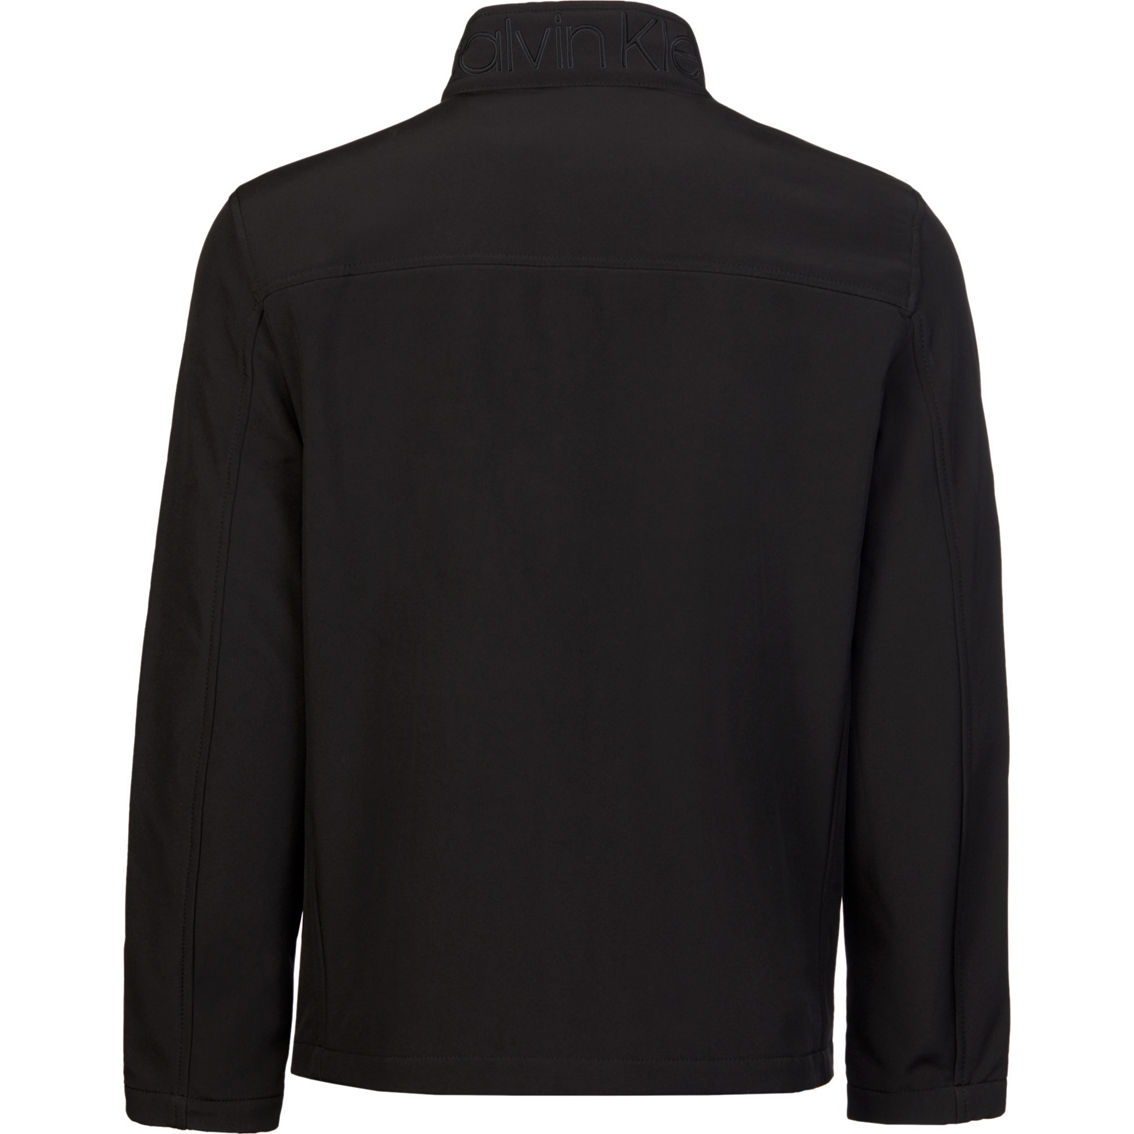 Calvin Klein Soft Shell Jacket - Image 10 of 10